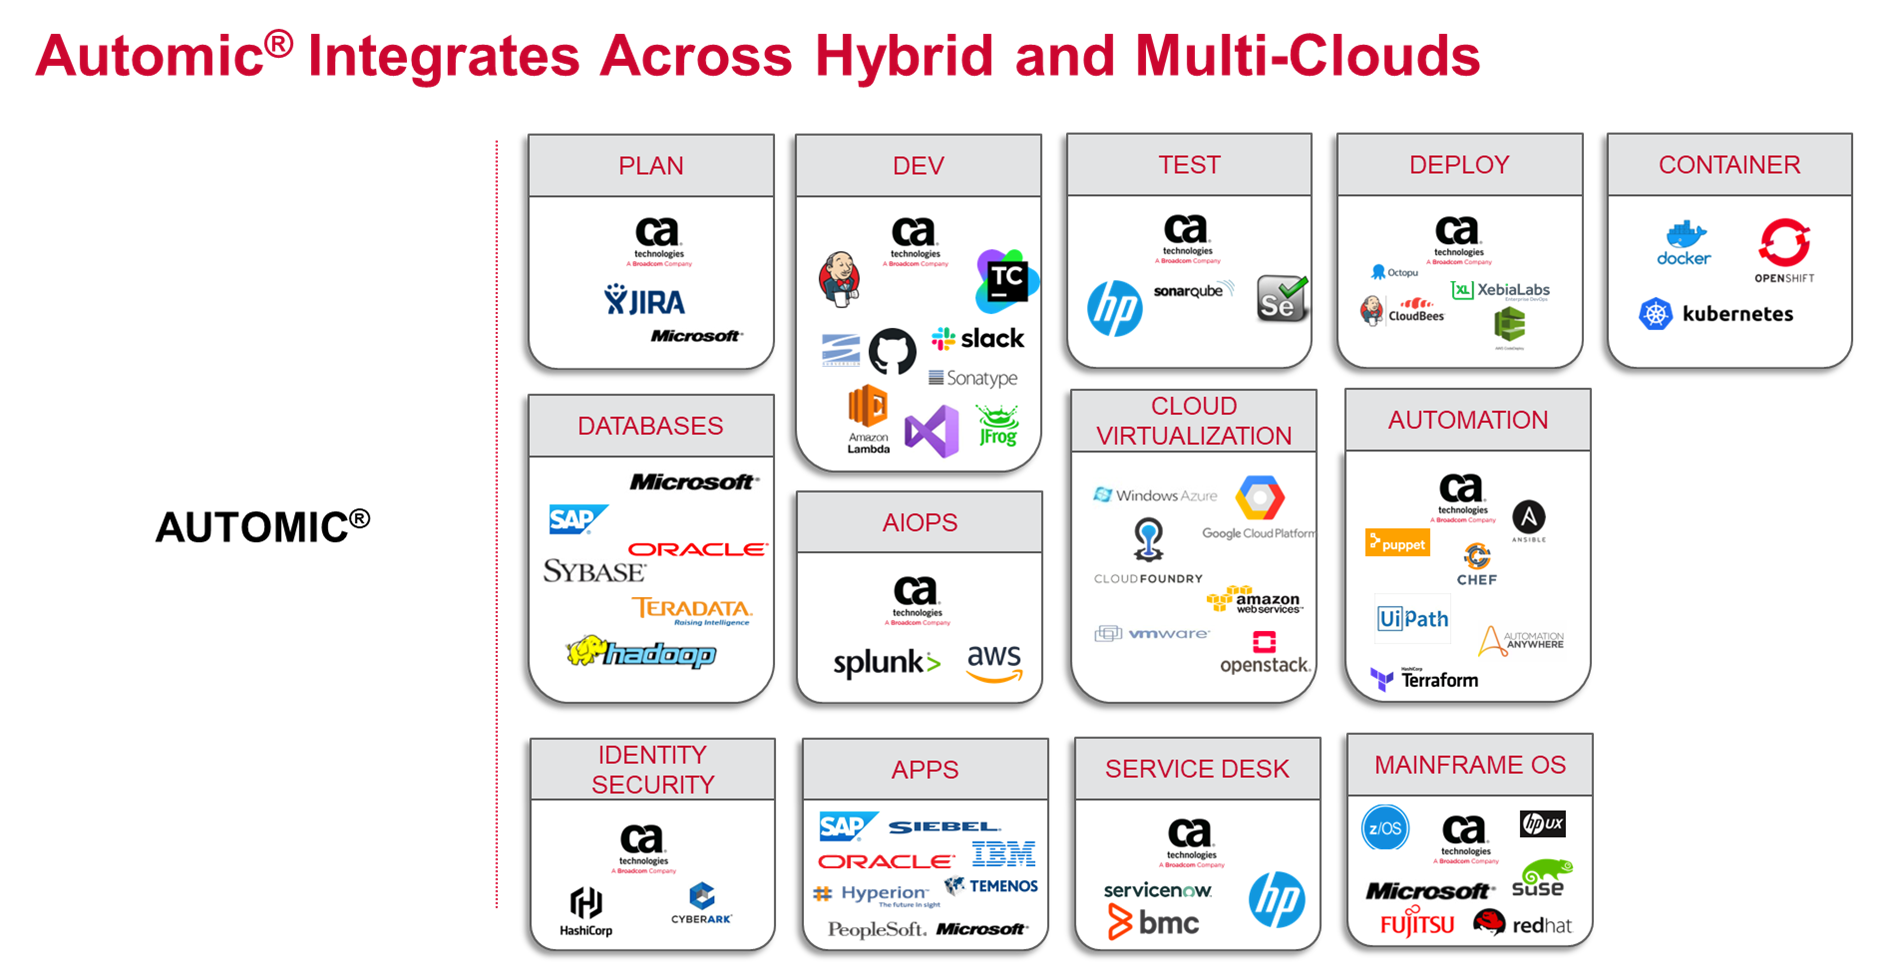 Overview of Automic Integrates Across Hybrid and Multi-Clouds